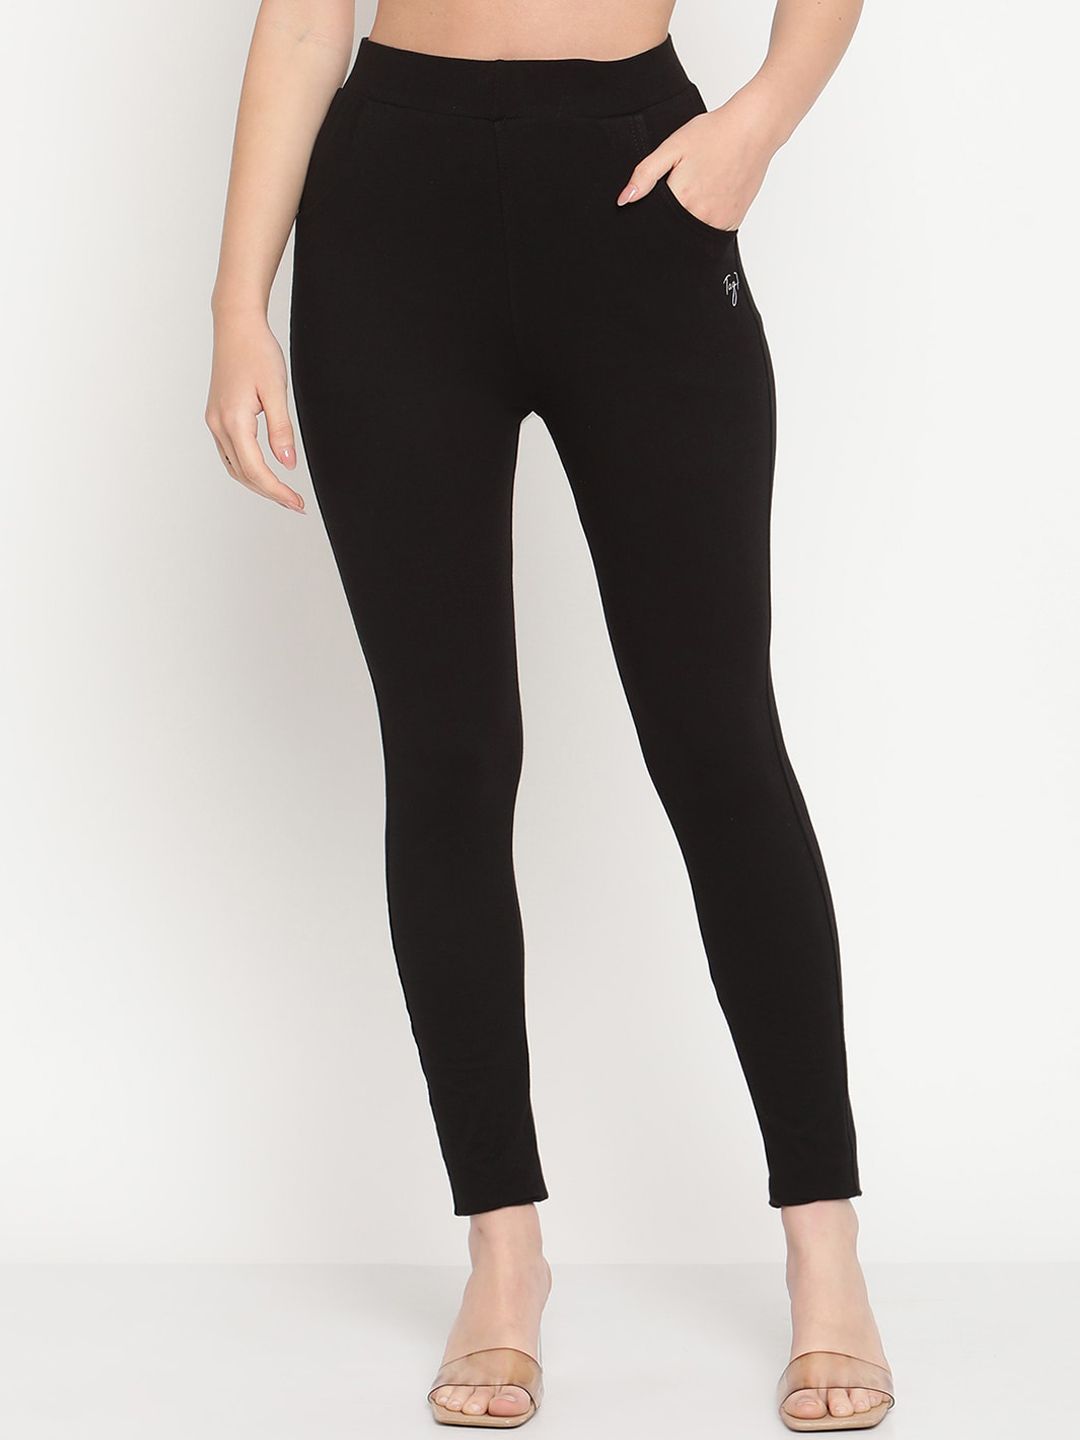 TAG 7 Women Black Solid Ankle-Length Leggings Price in India